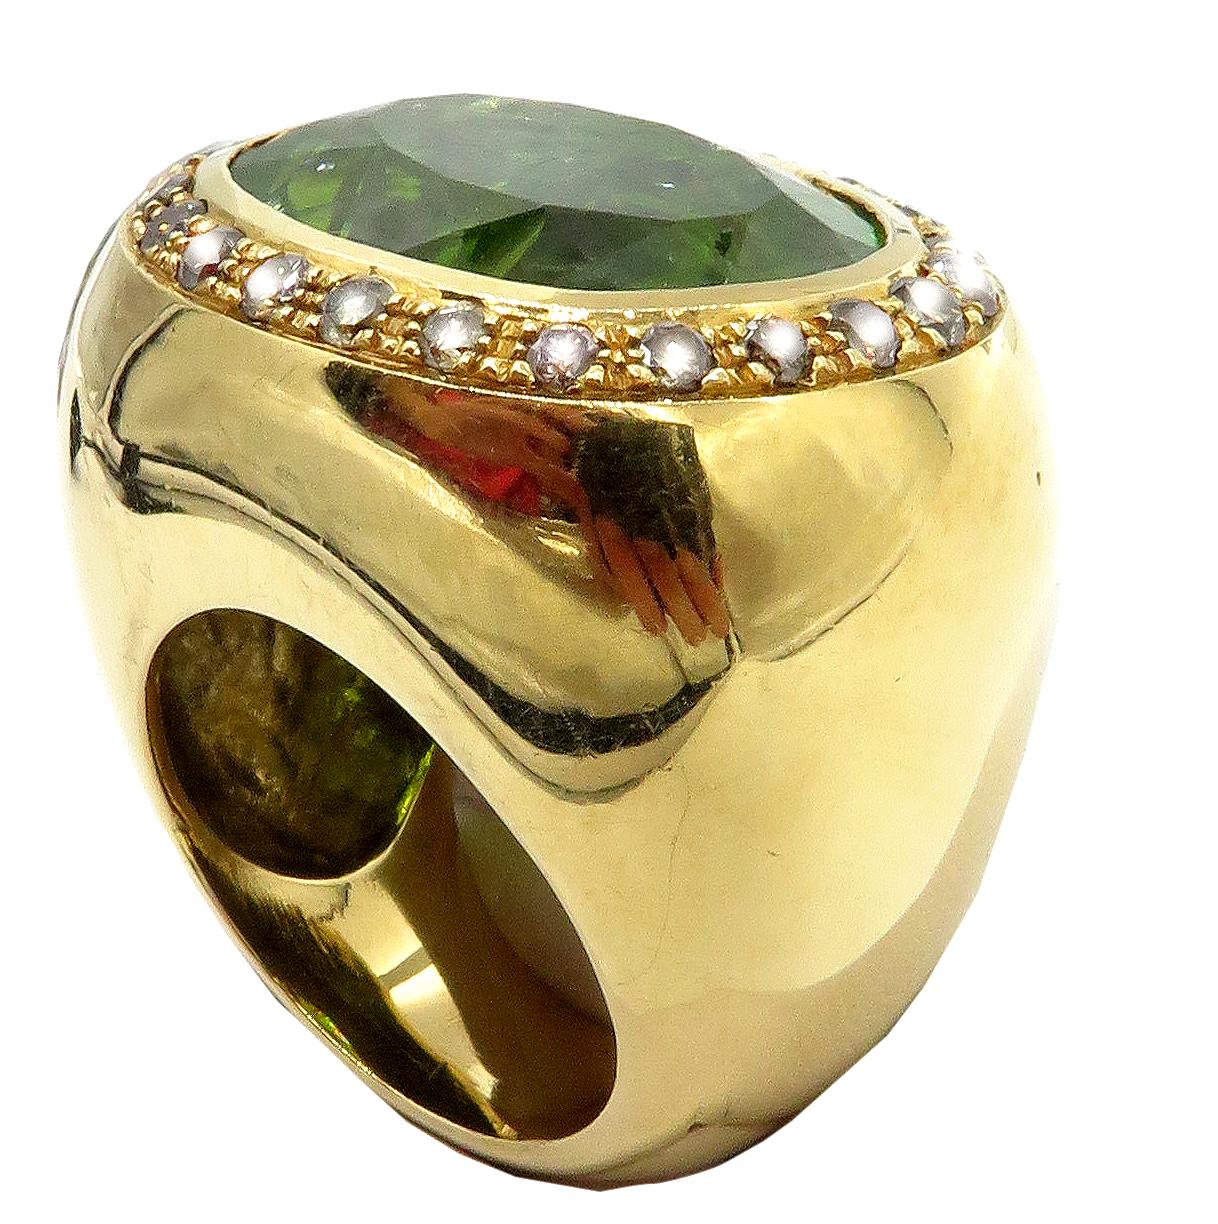 We are offering this beautiful, Peridot & Diamond 18kt yellow gold ring in a U.S ring size 7 1/4. A beautiful cocktail ring with a 0.75